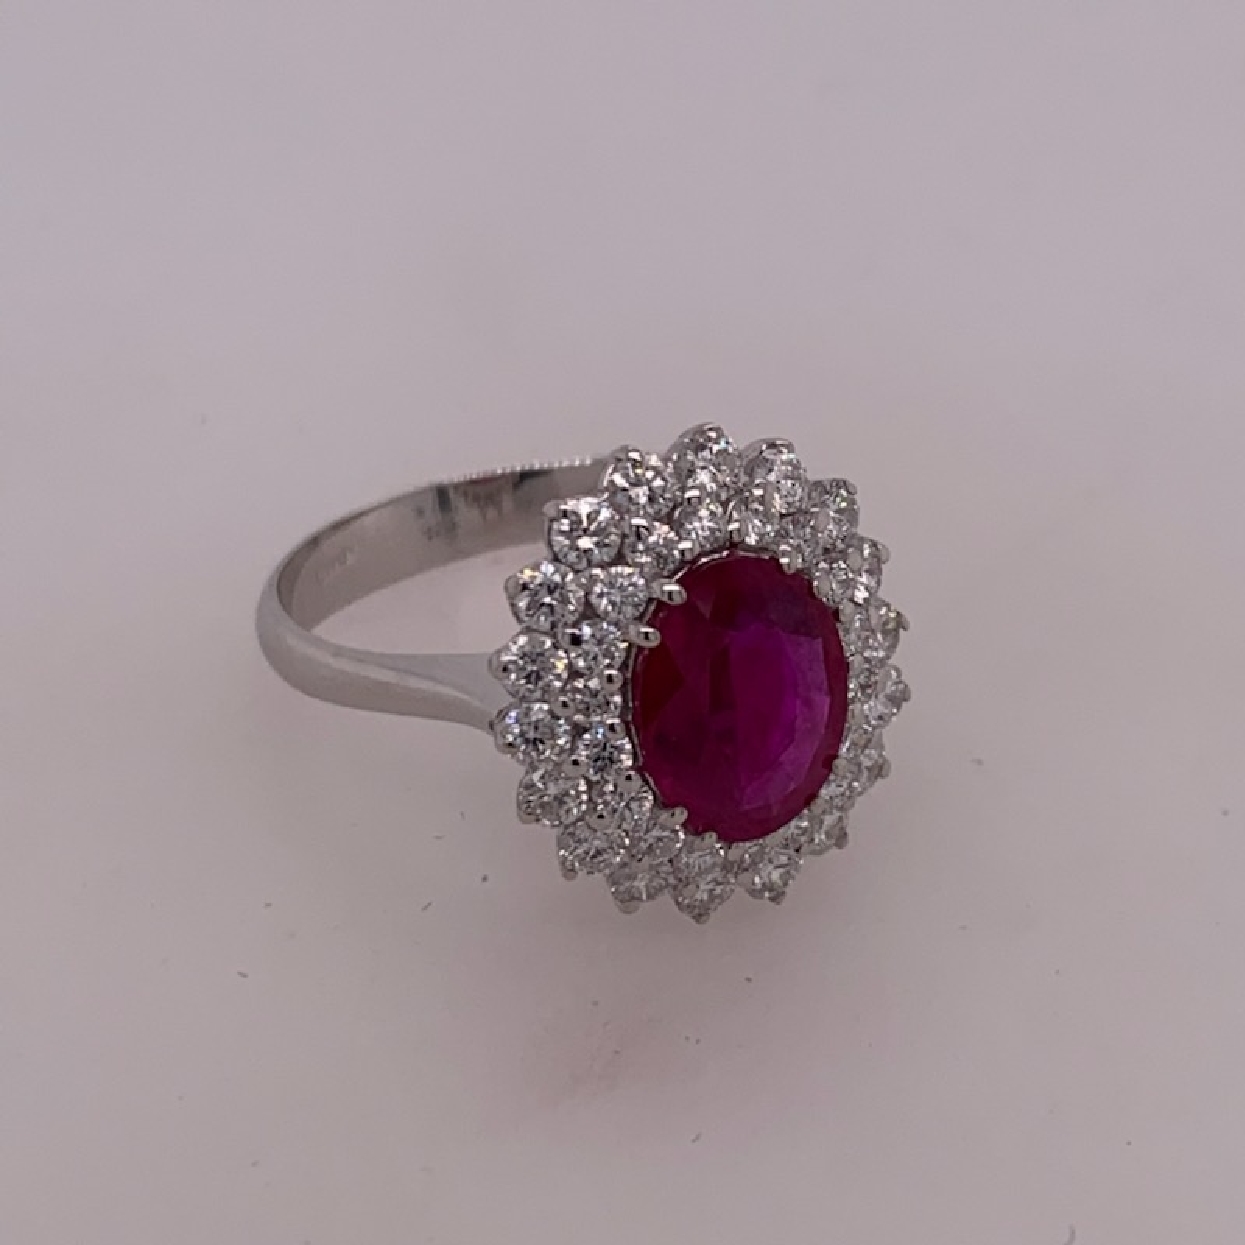 18k White Gold Oval Natural Step Cut Burma Ruby with Double Diamond Halo Size 7

Ruby: 1.63ct

Comes with Copy of GIA Cert